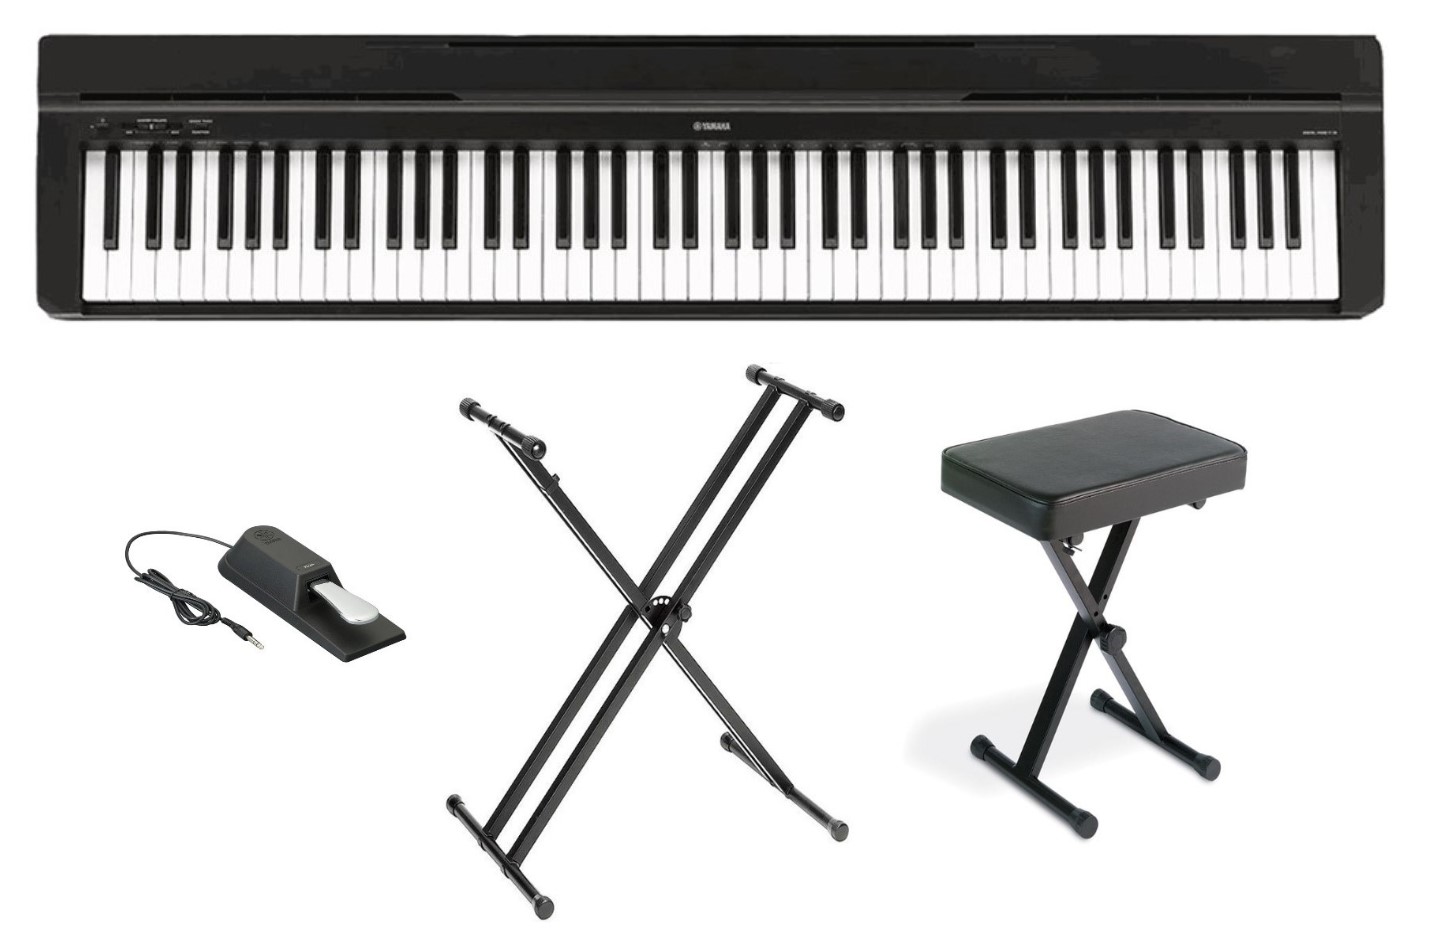 P-45 - Accessories - Portables - Pianos - Musical Instruments